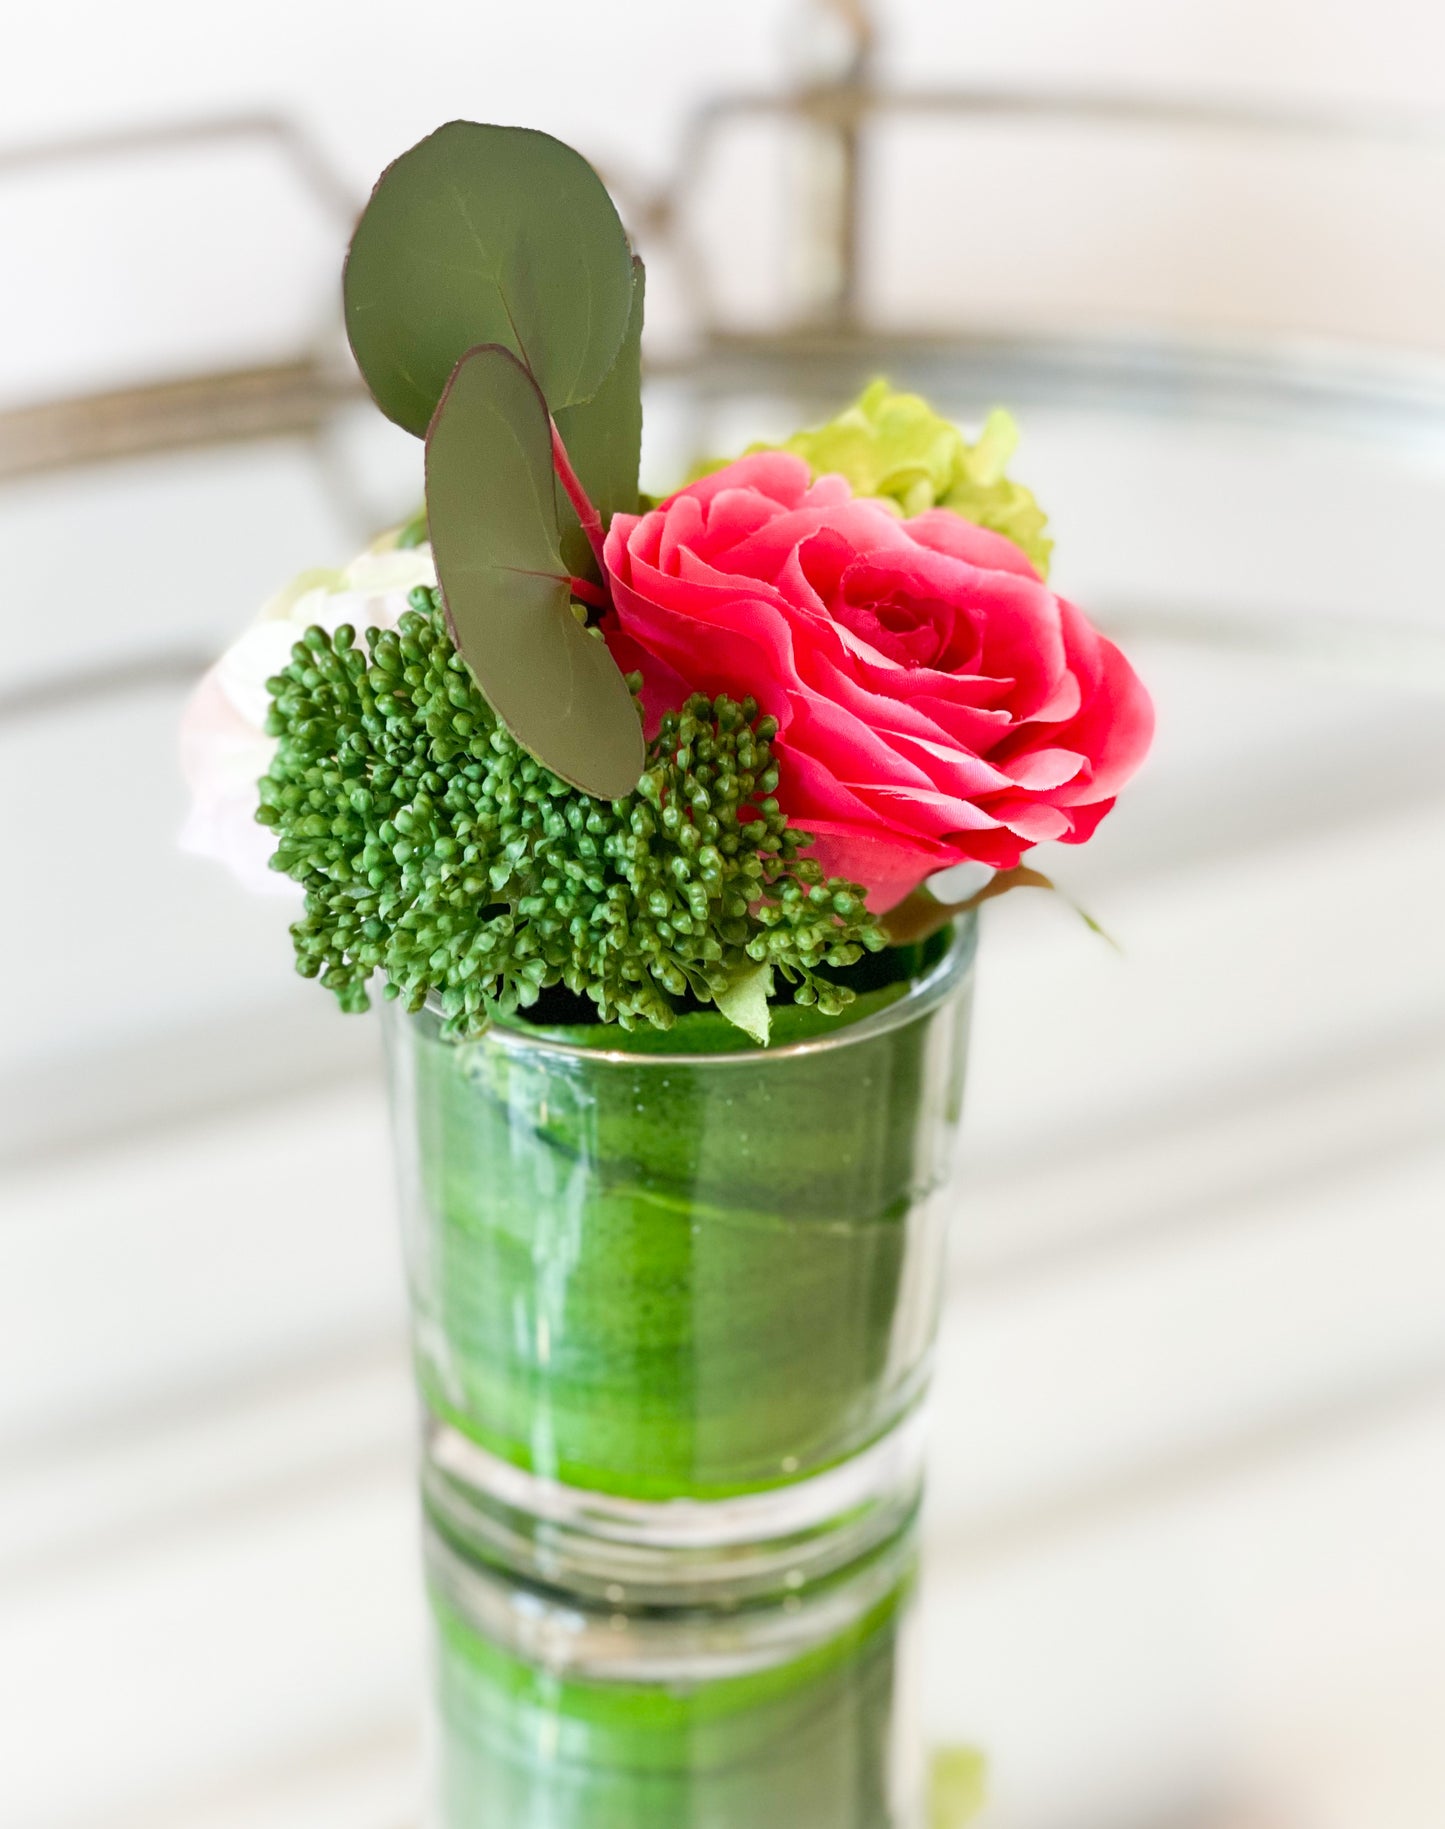 Ranunculus, Rose, And Snowball In A Glass Vase